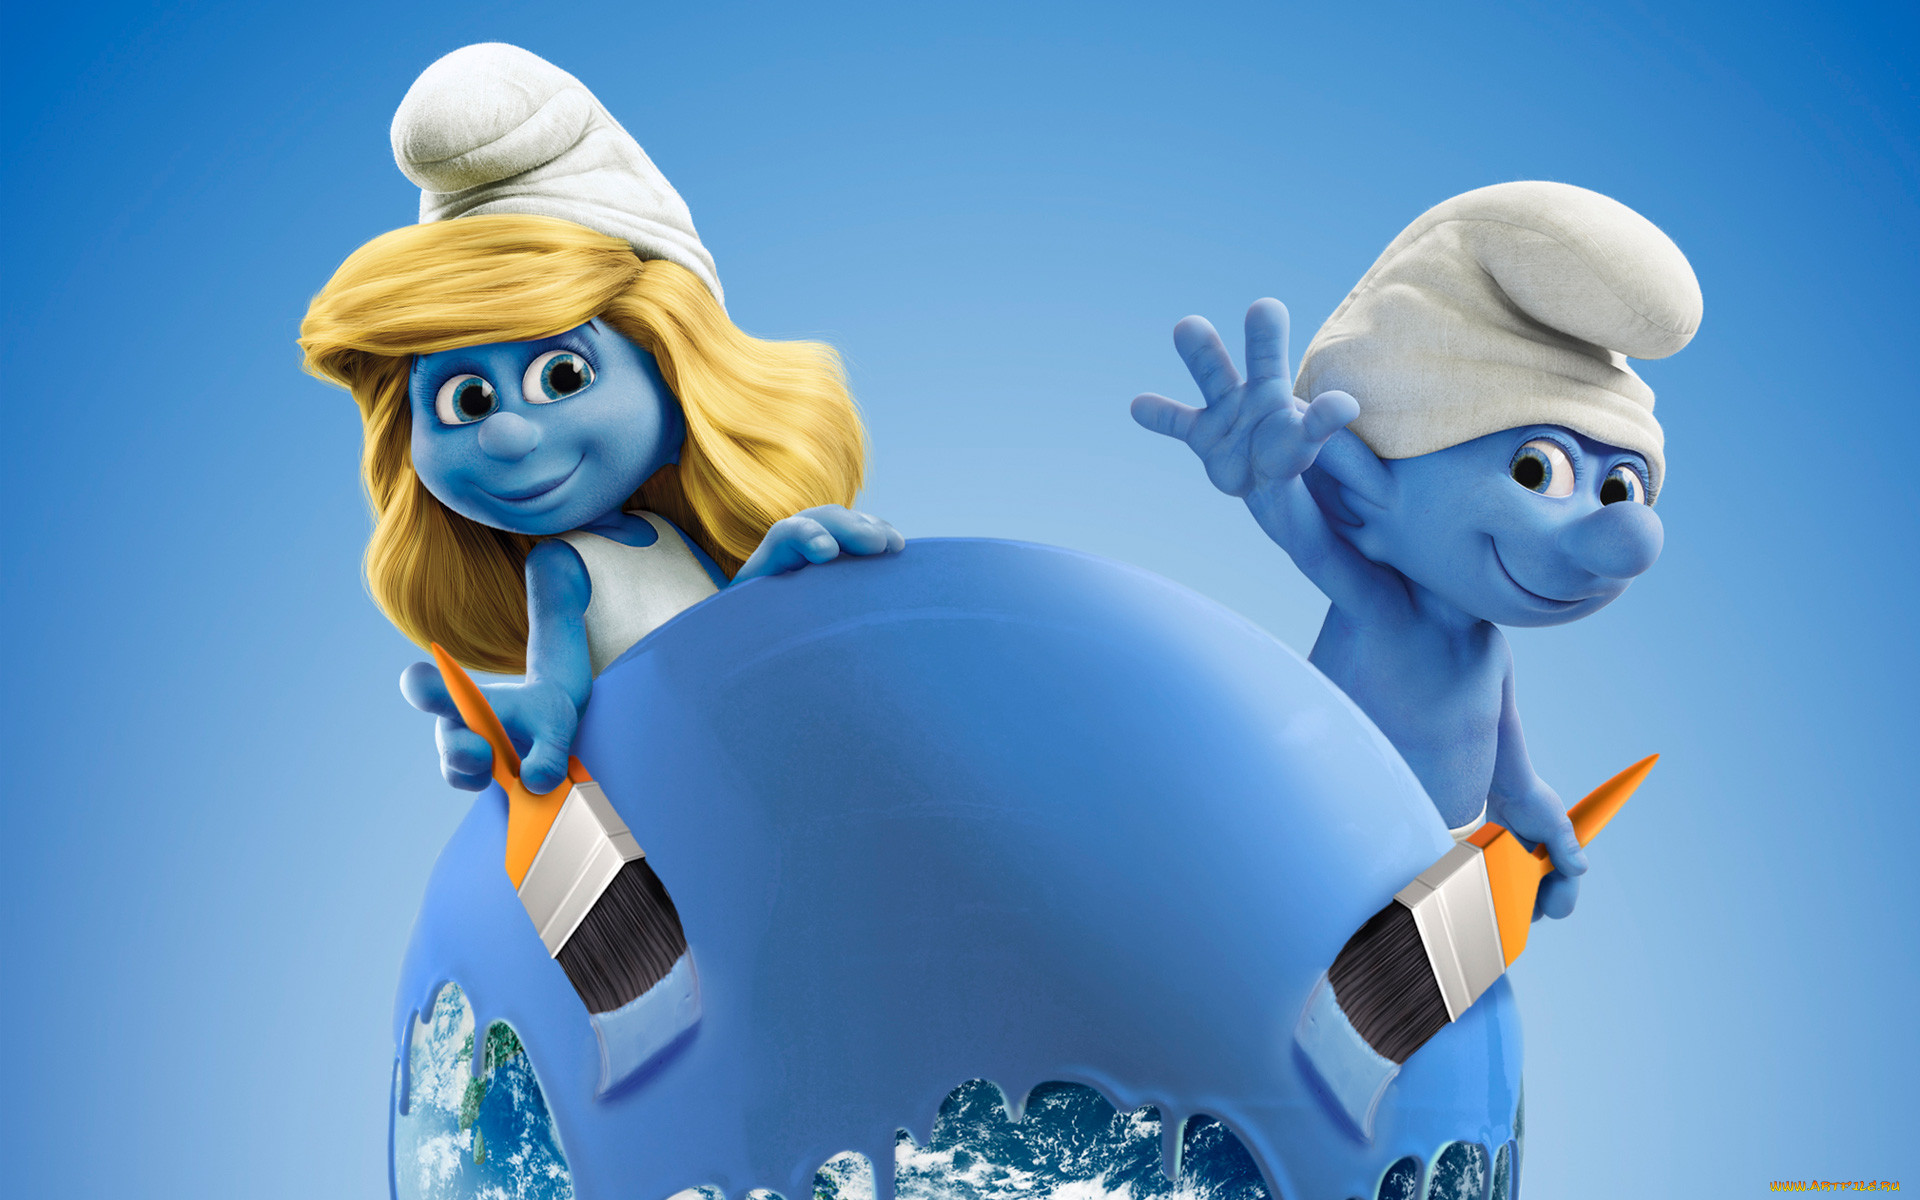 Smurfs the lost village. Смурфики (the Smurfs) 2011. Смурфетта 3. Смурфетта великан.